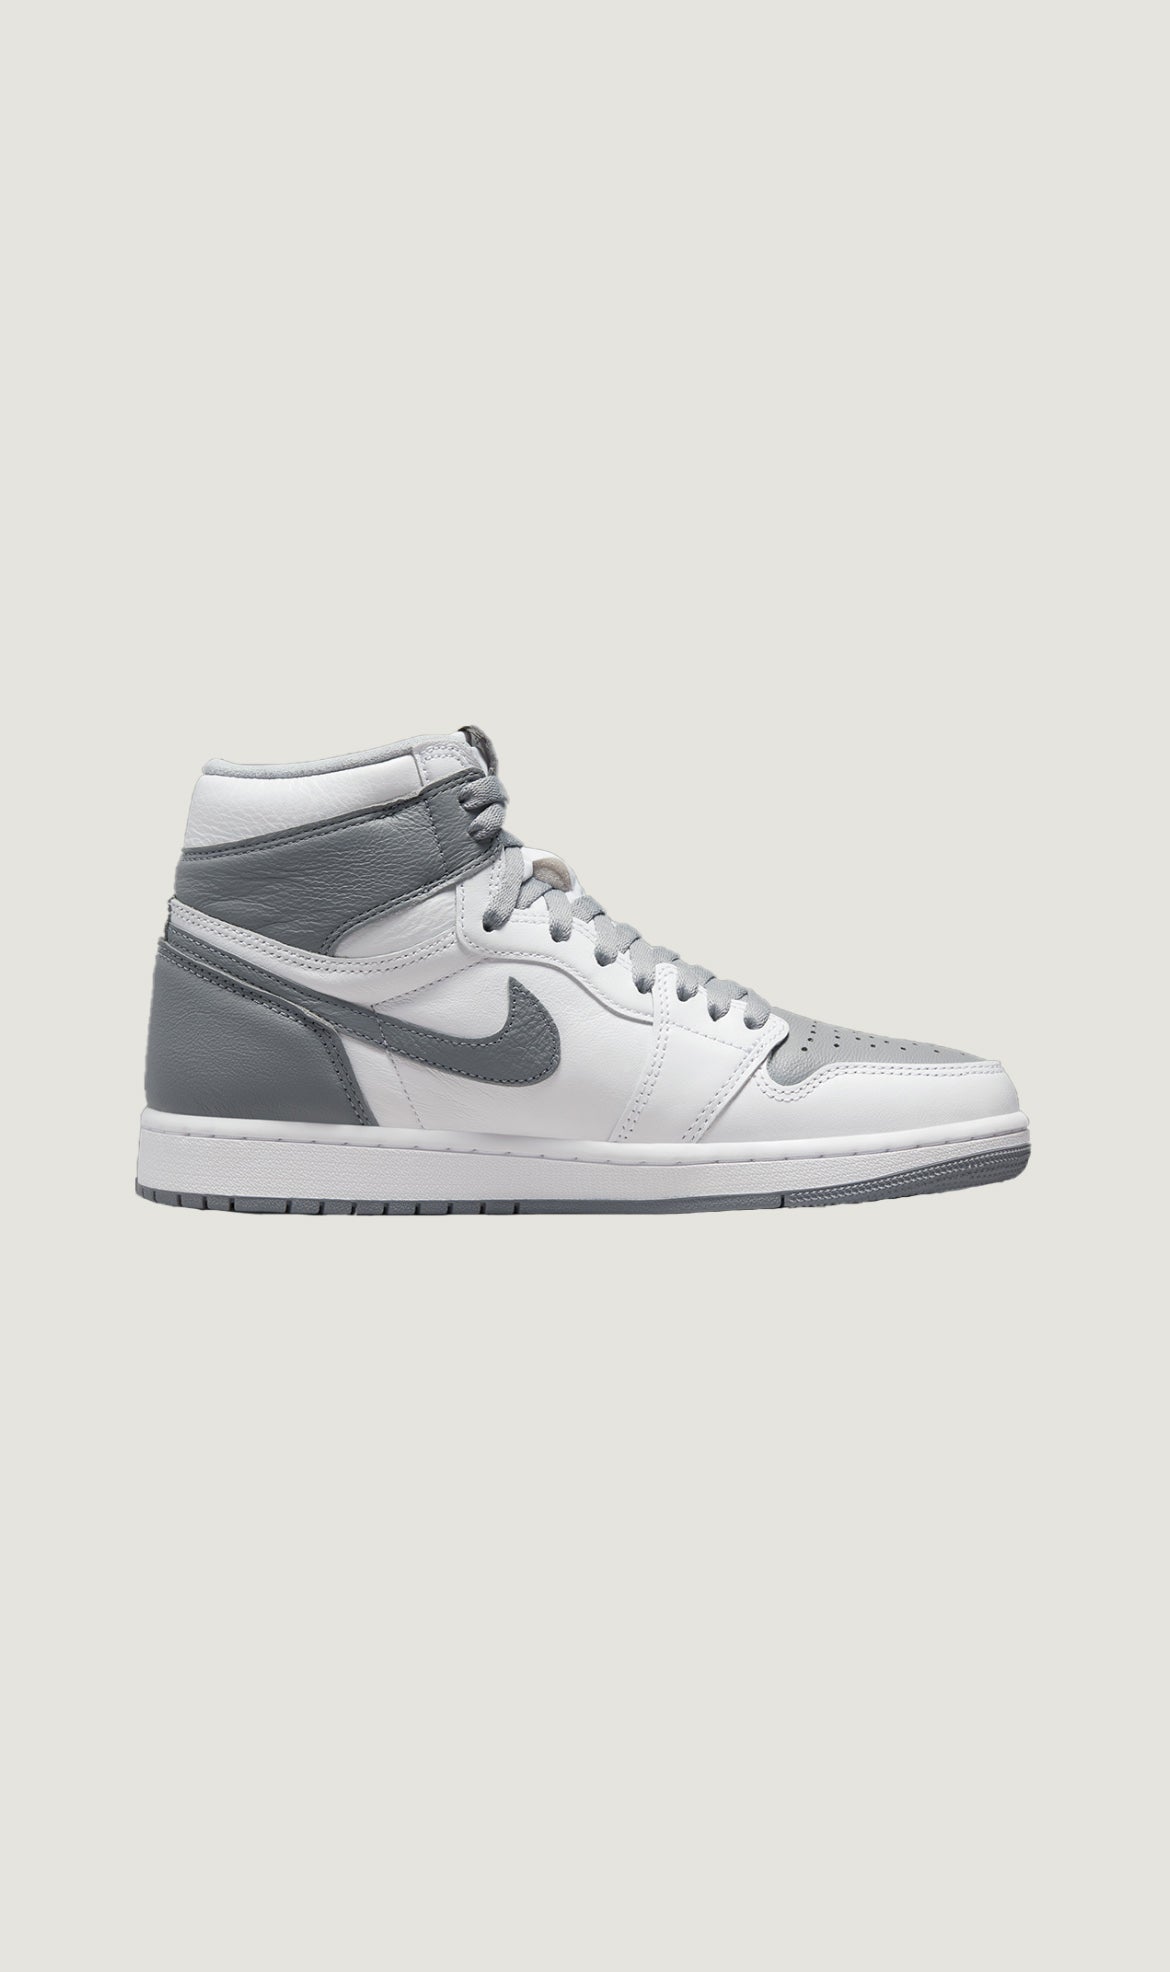 Load image into Gallery viewer, AIR JORDAN 1 RETRO HIGH OG - STEALTH
